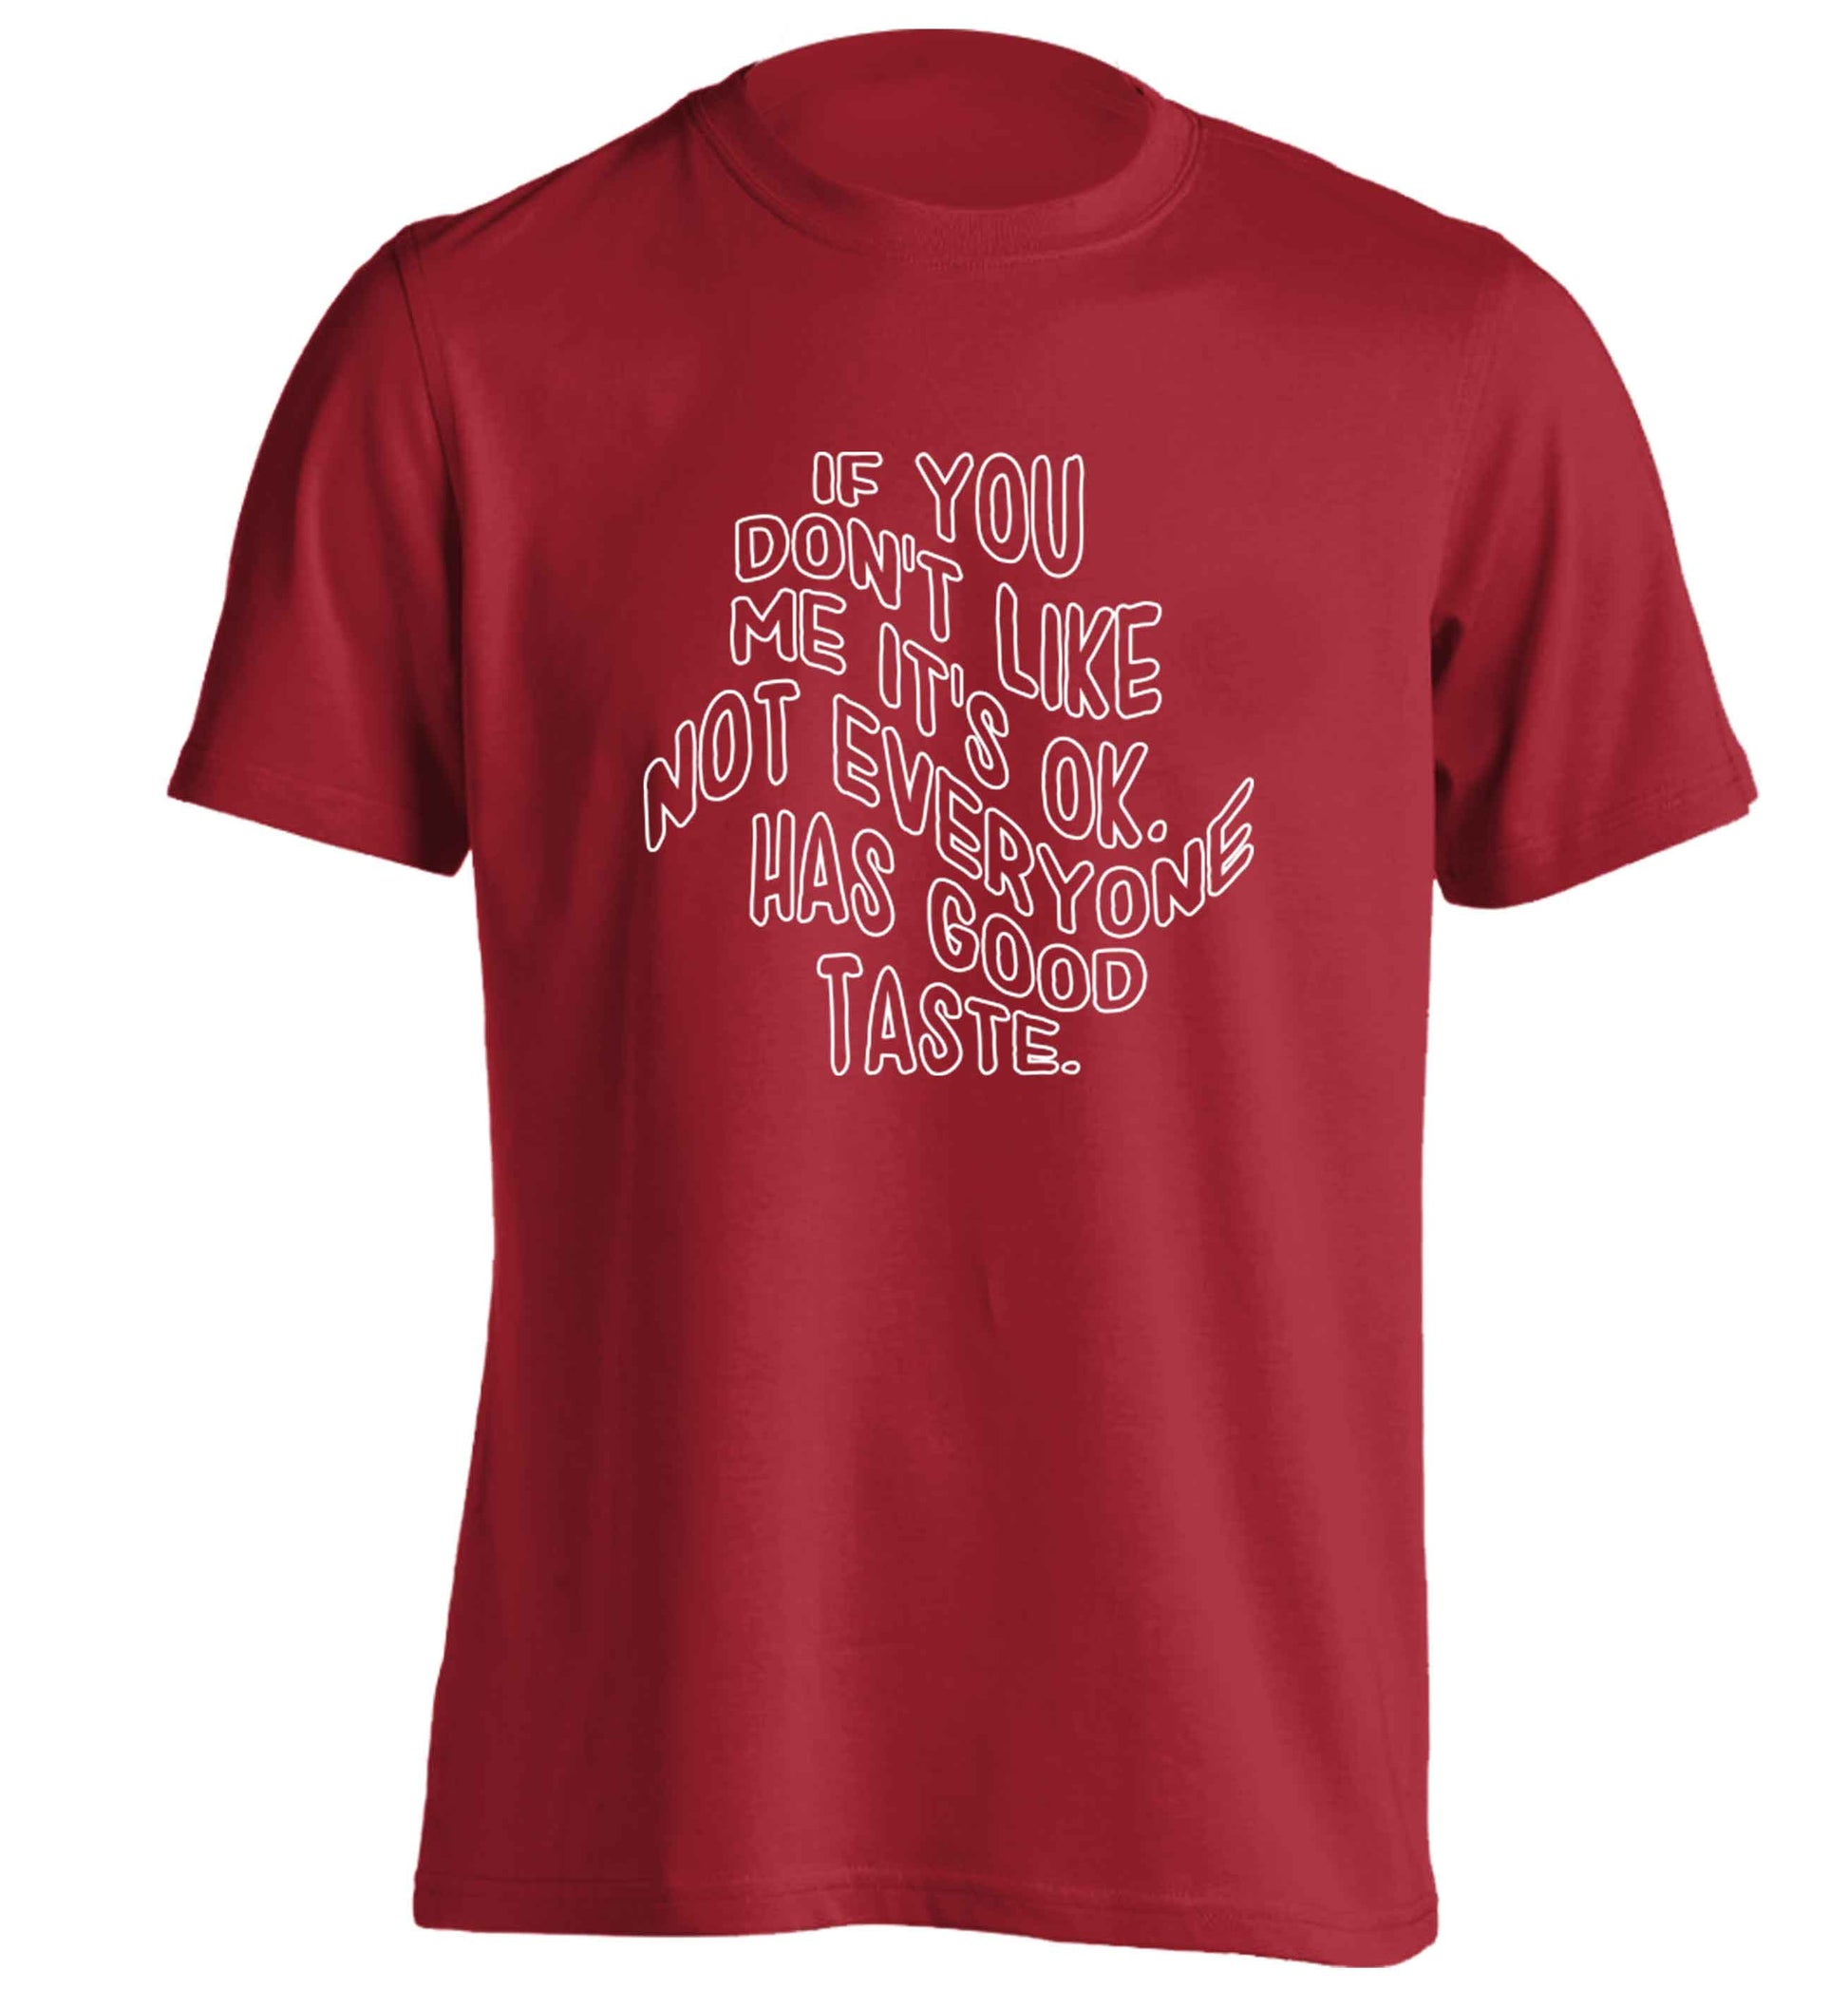 If you don't like me it's ok not everyone has good taste adults unisex red Tshirt 2XL